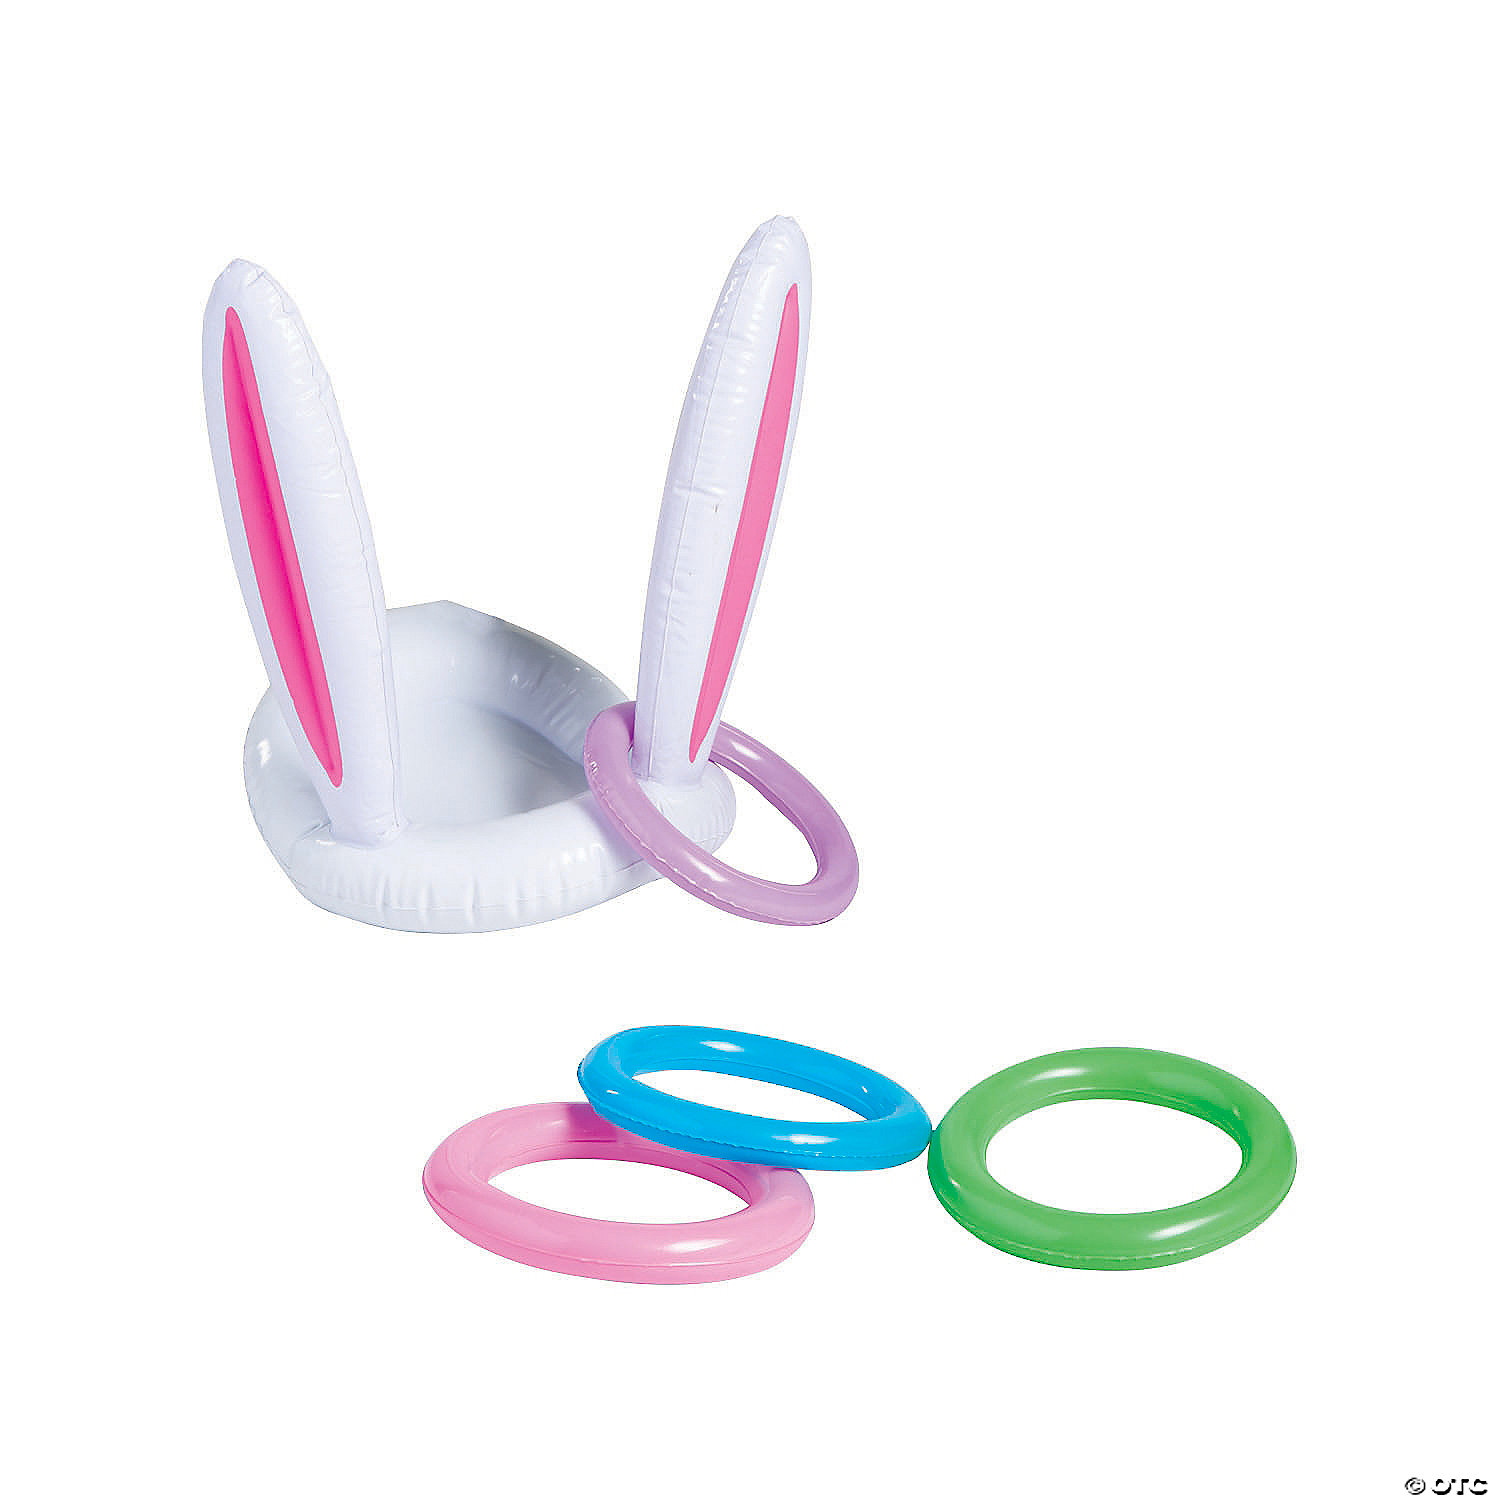 LOKIPA Inflatable Bunny Rabbit Ears Hat with 6 Rings Party holiday Toss Game 